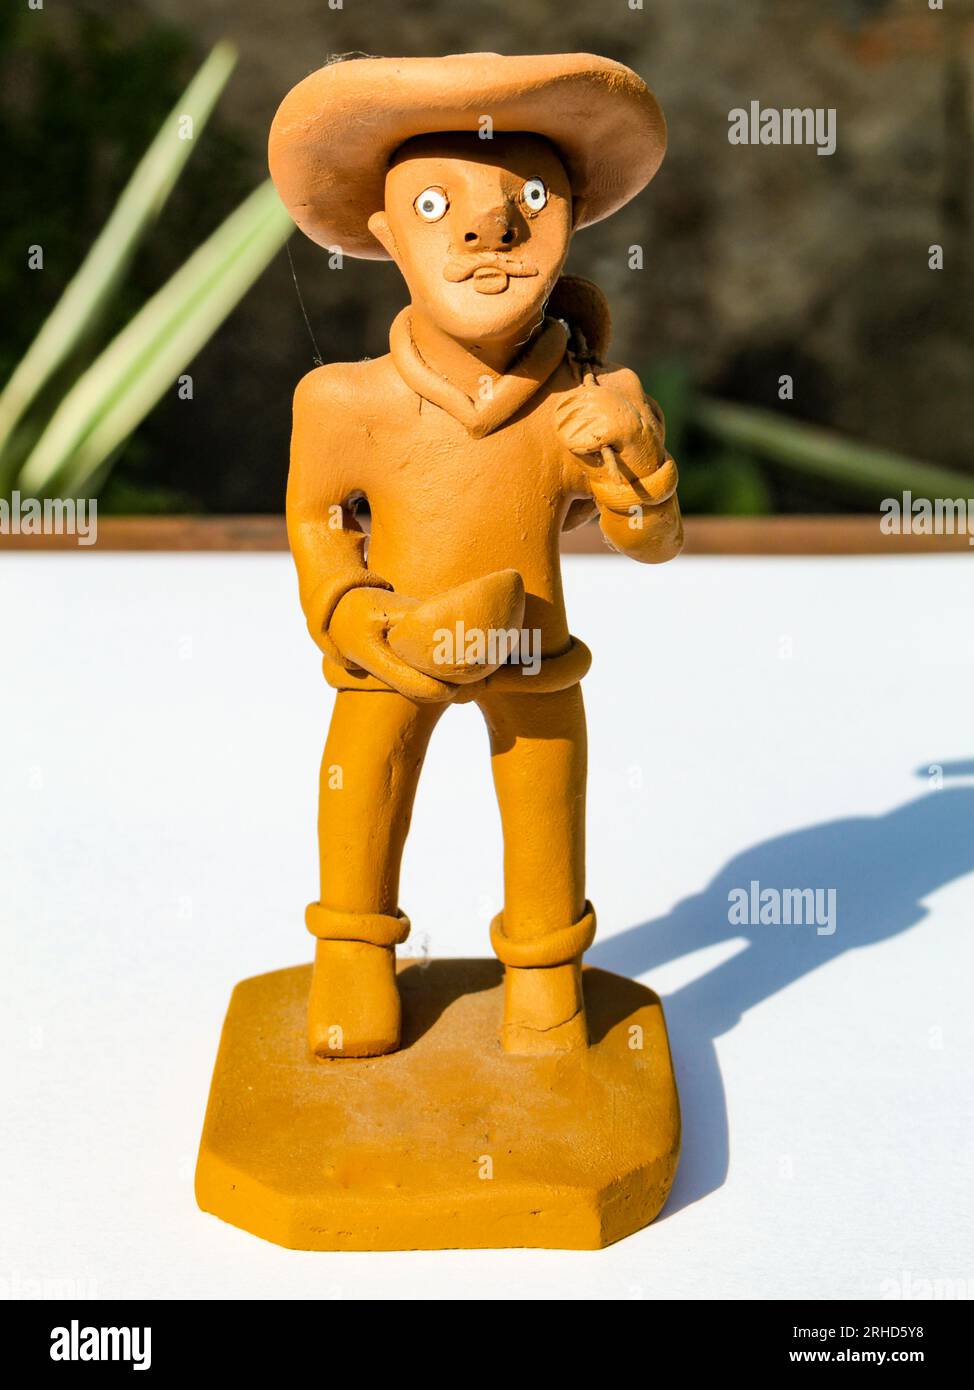 Small clay statue that portrays the northeastern man, for sale to tourists in Northeast Brazil. Stock Photo